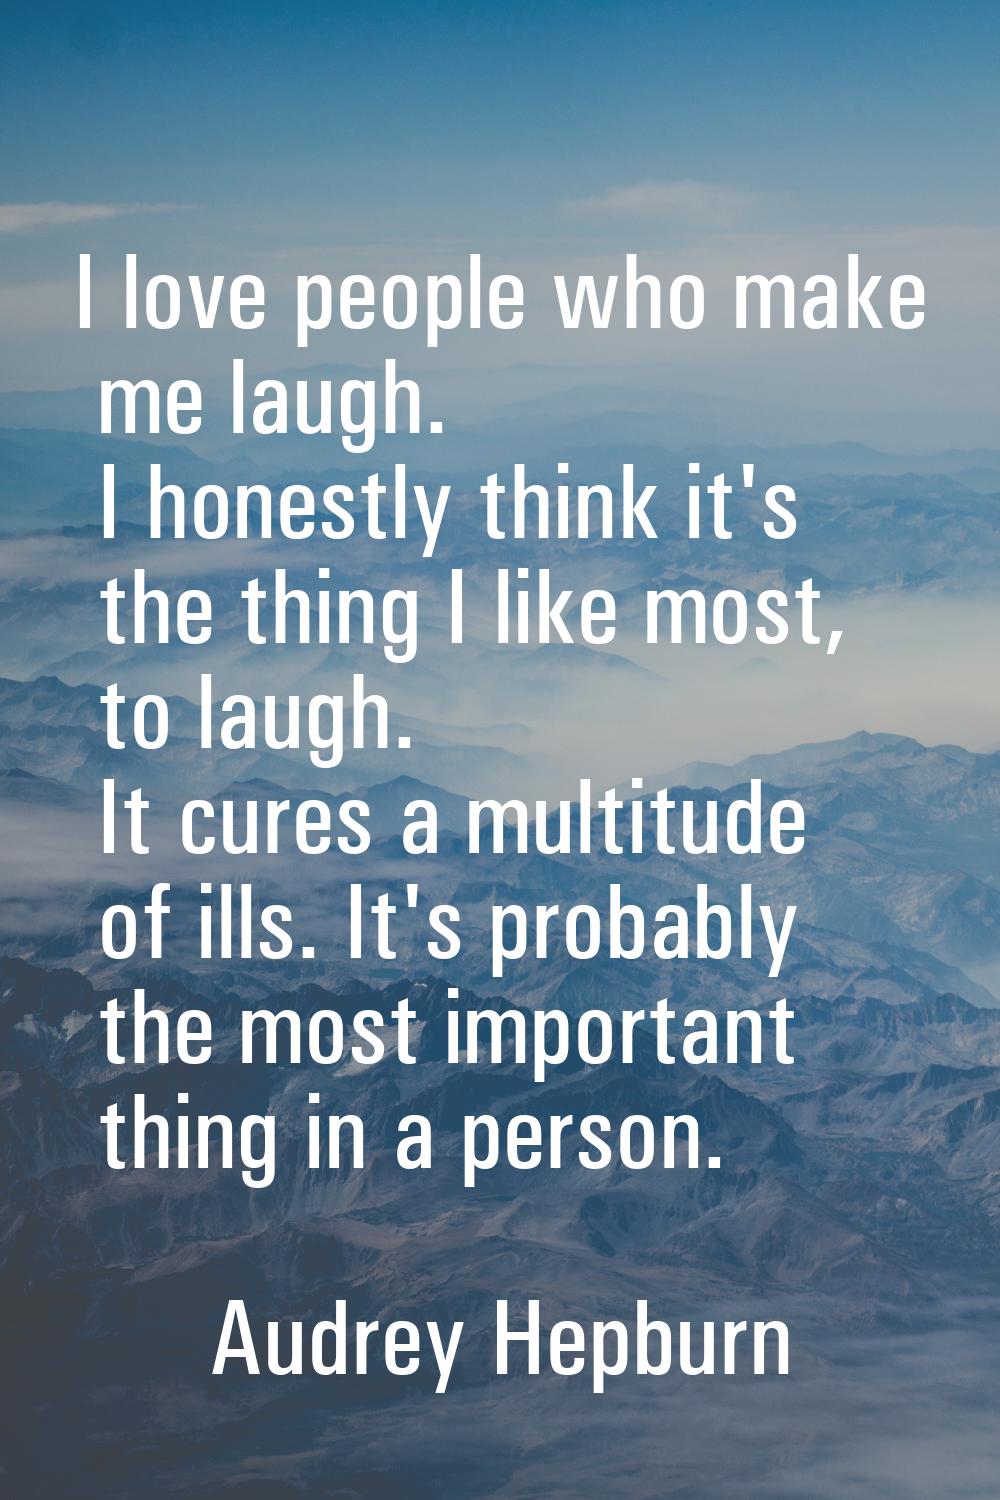 I love people who make me laugh. I honestly think it's the thing I like most, to laugh. It cures a 